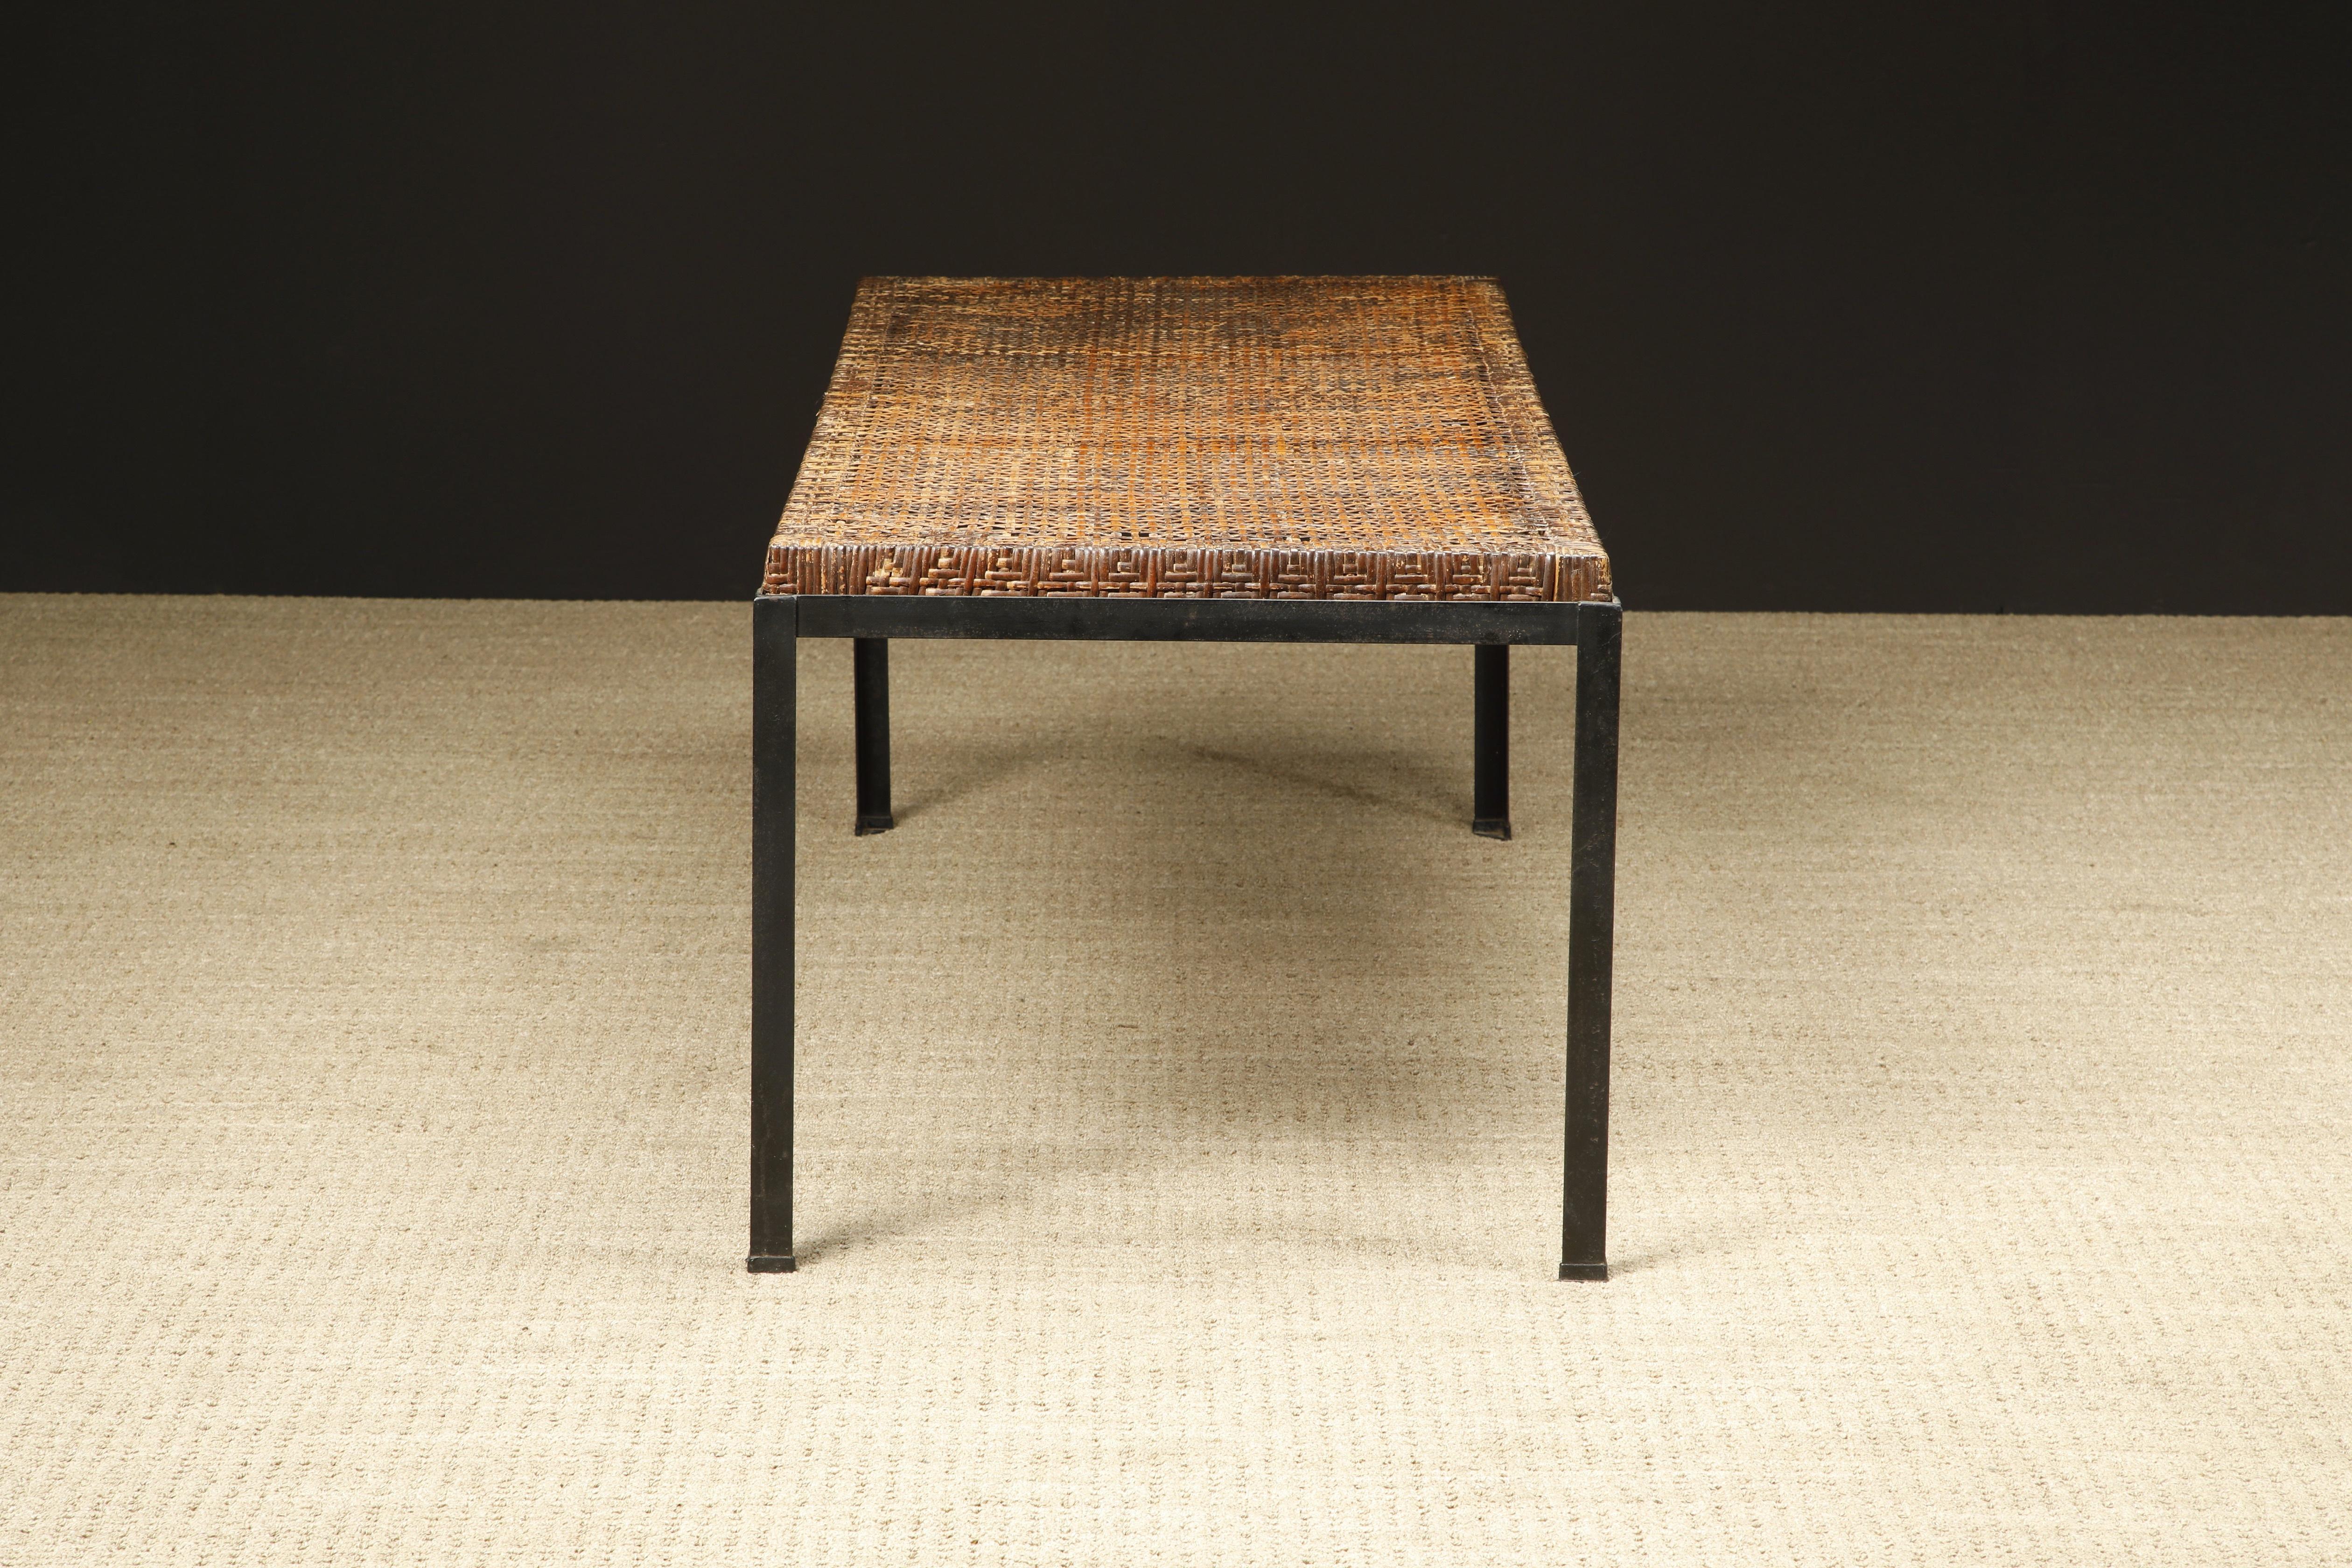 Mid-20th Century Caned Dining Table by Danny Ho Fong for Tropi-cal in Iron and Rattan, c 1960s For Sale